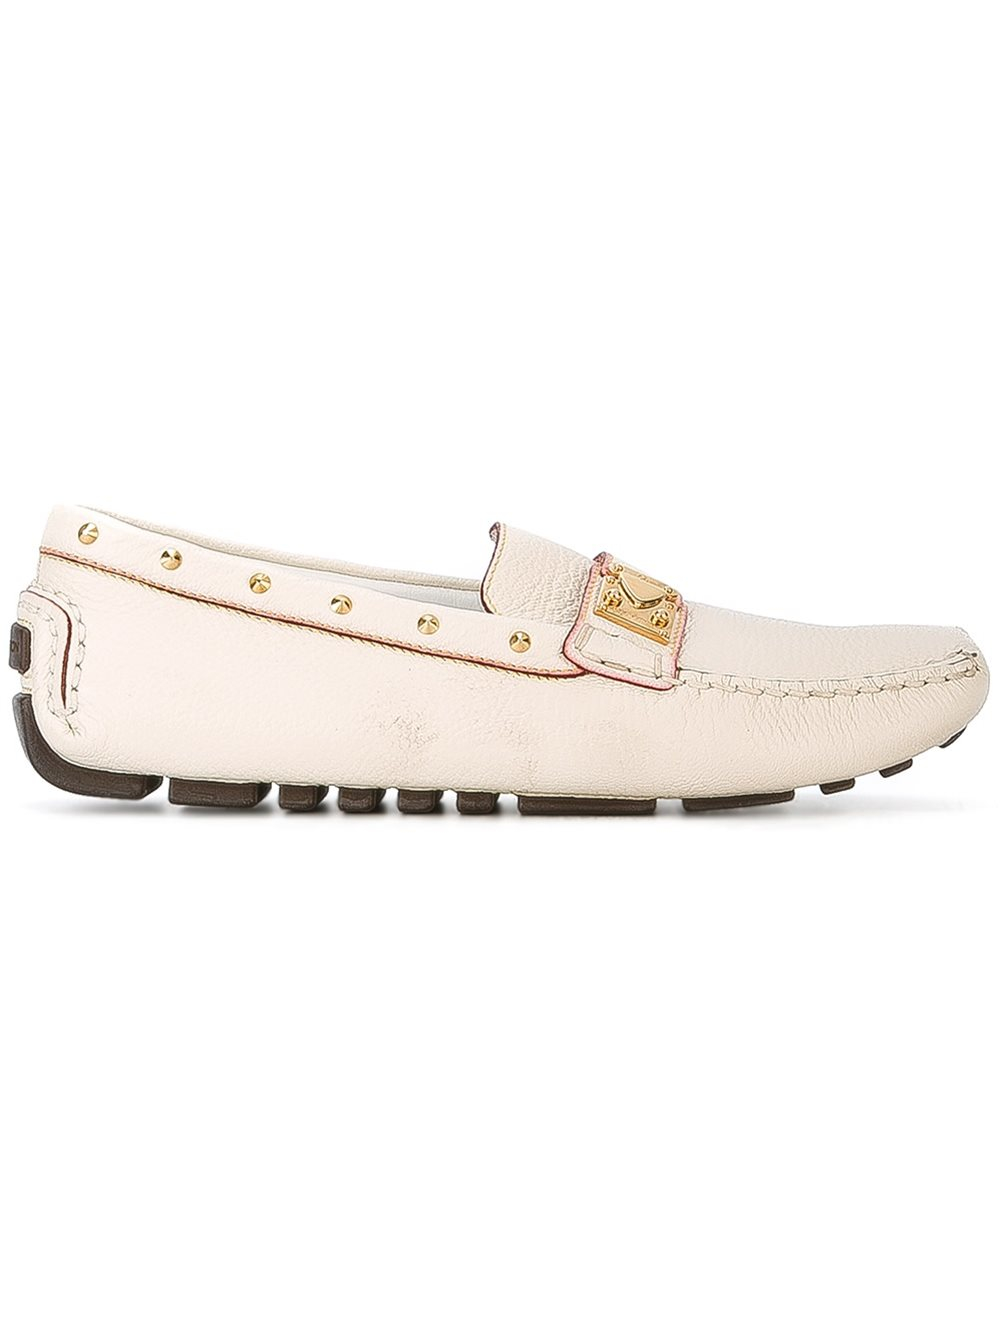 Lyst - Louis vuitton Studded Loafers in White